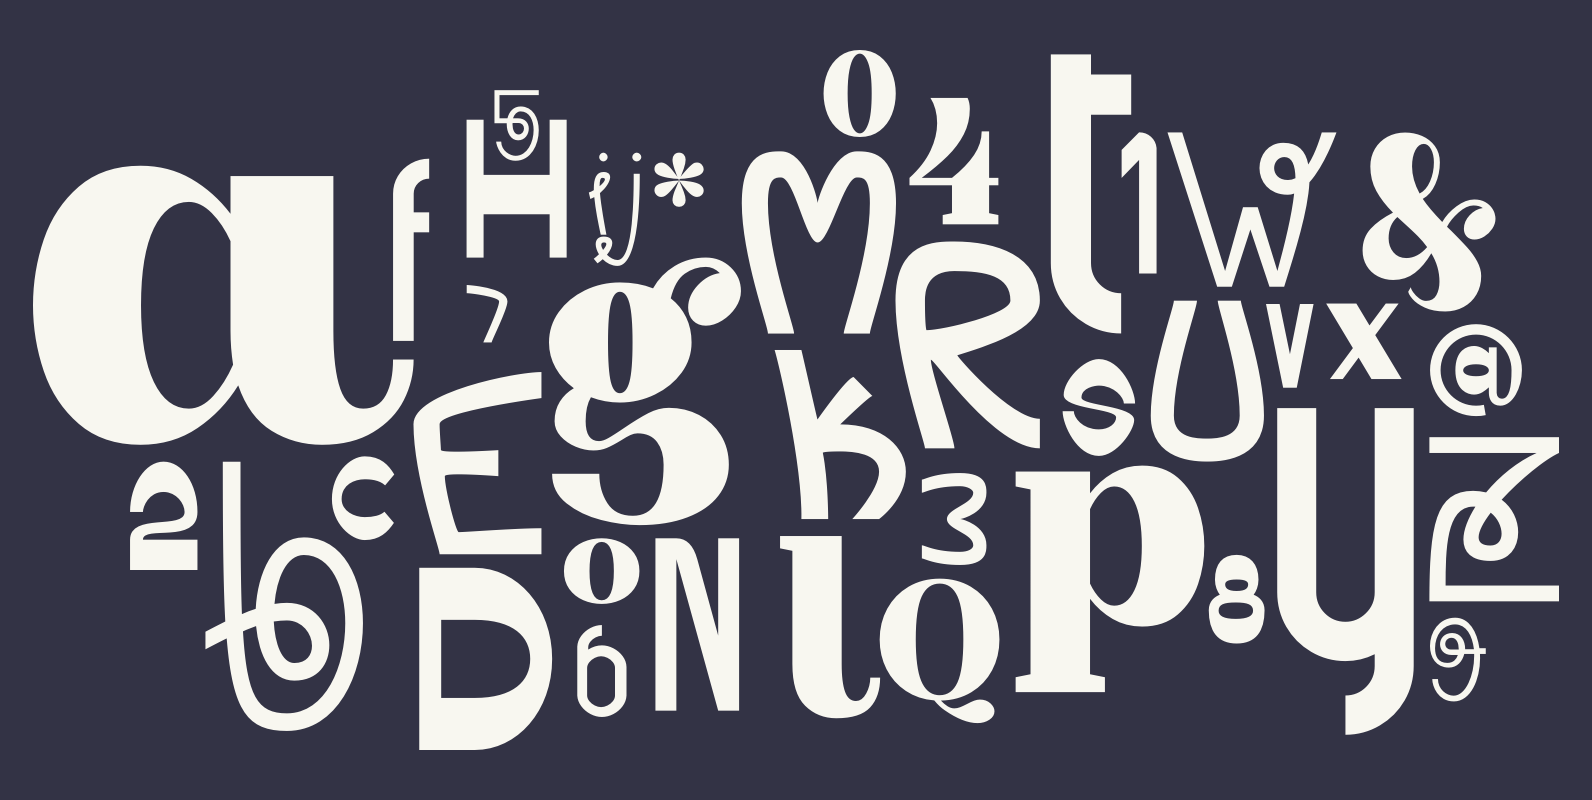 Image of letters and numbers jumbled together using different fonts.